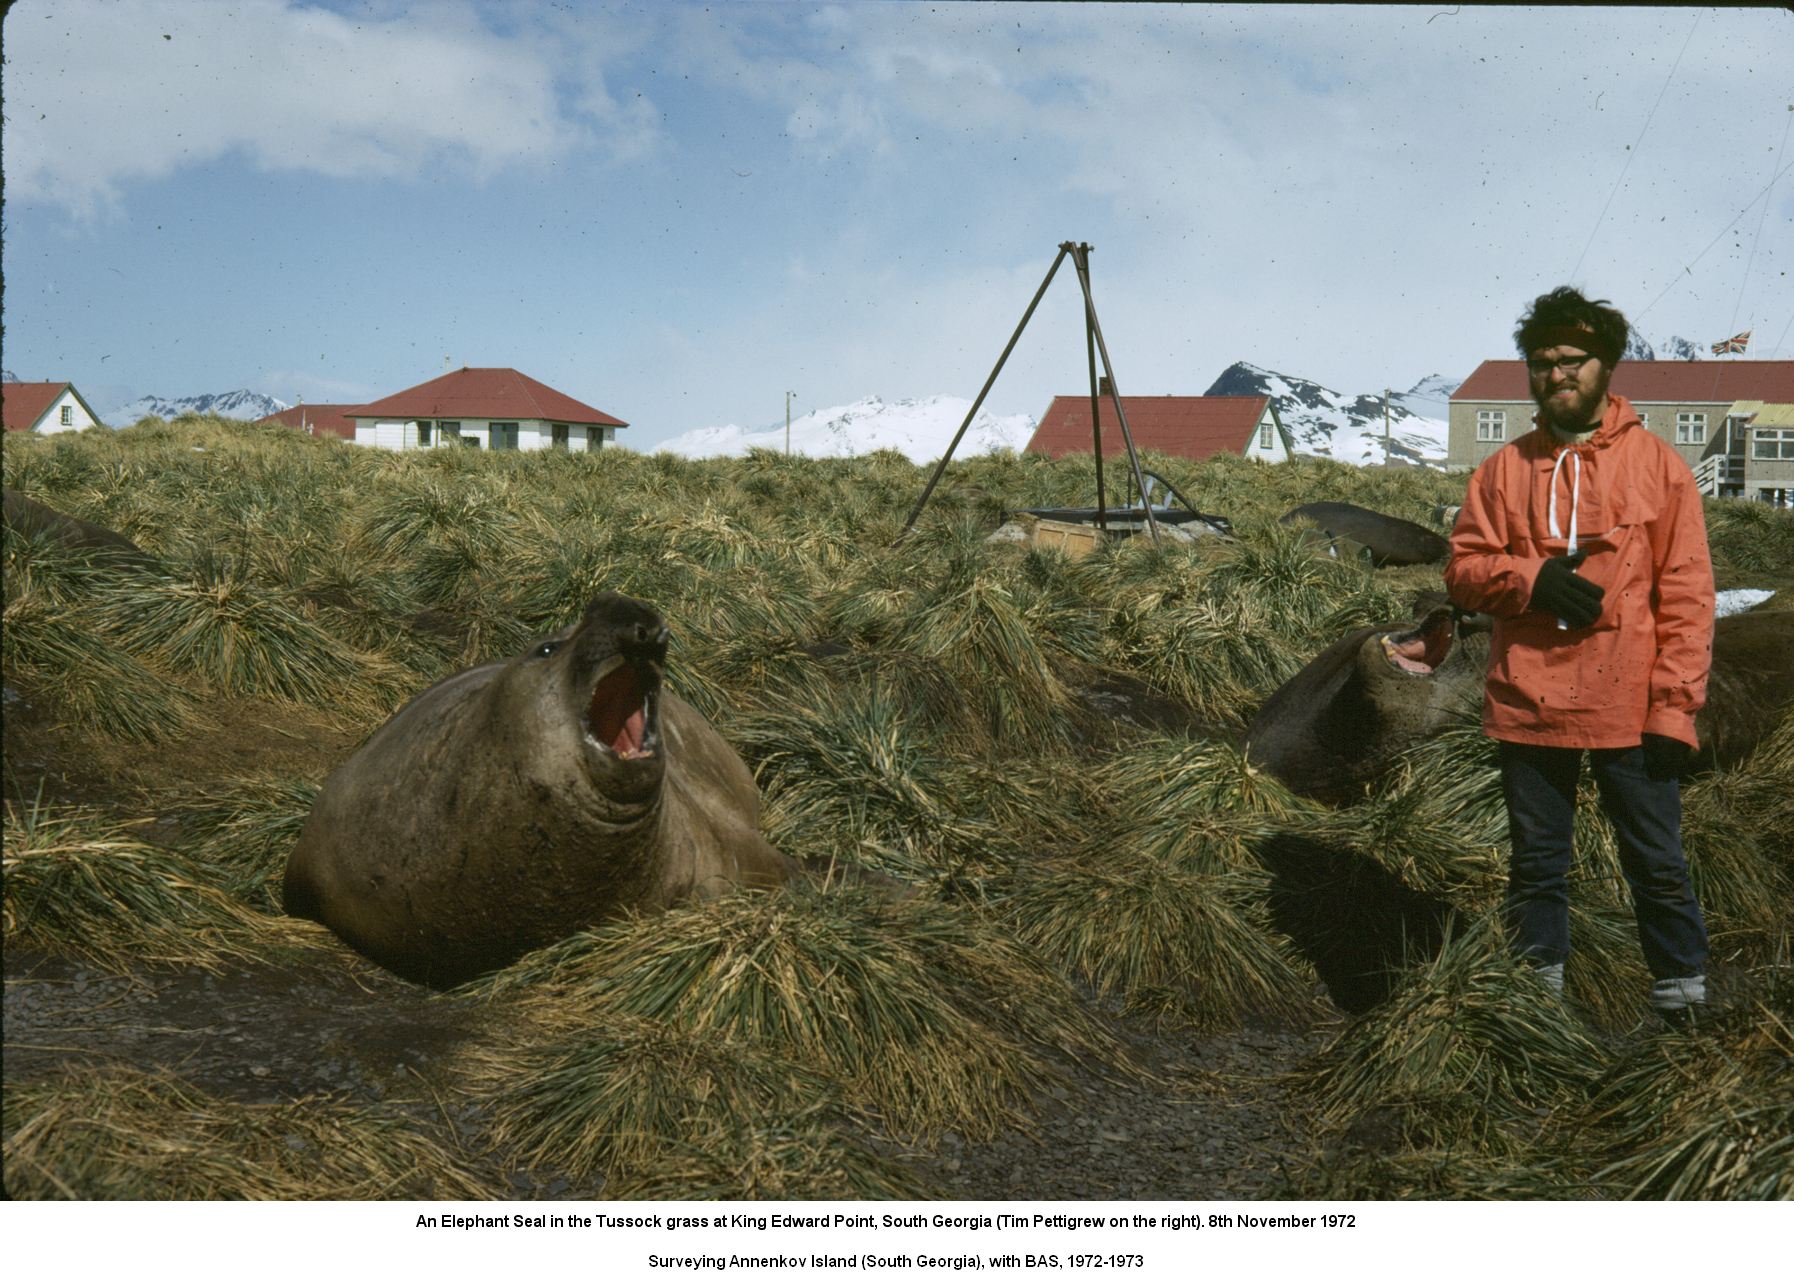 An Elephant Seal in the Tussock grass at King Edward Point, South Georgia (Tim Pettigrew on the right). 8th November 1972.